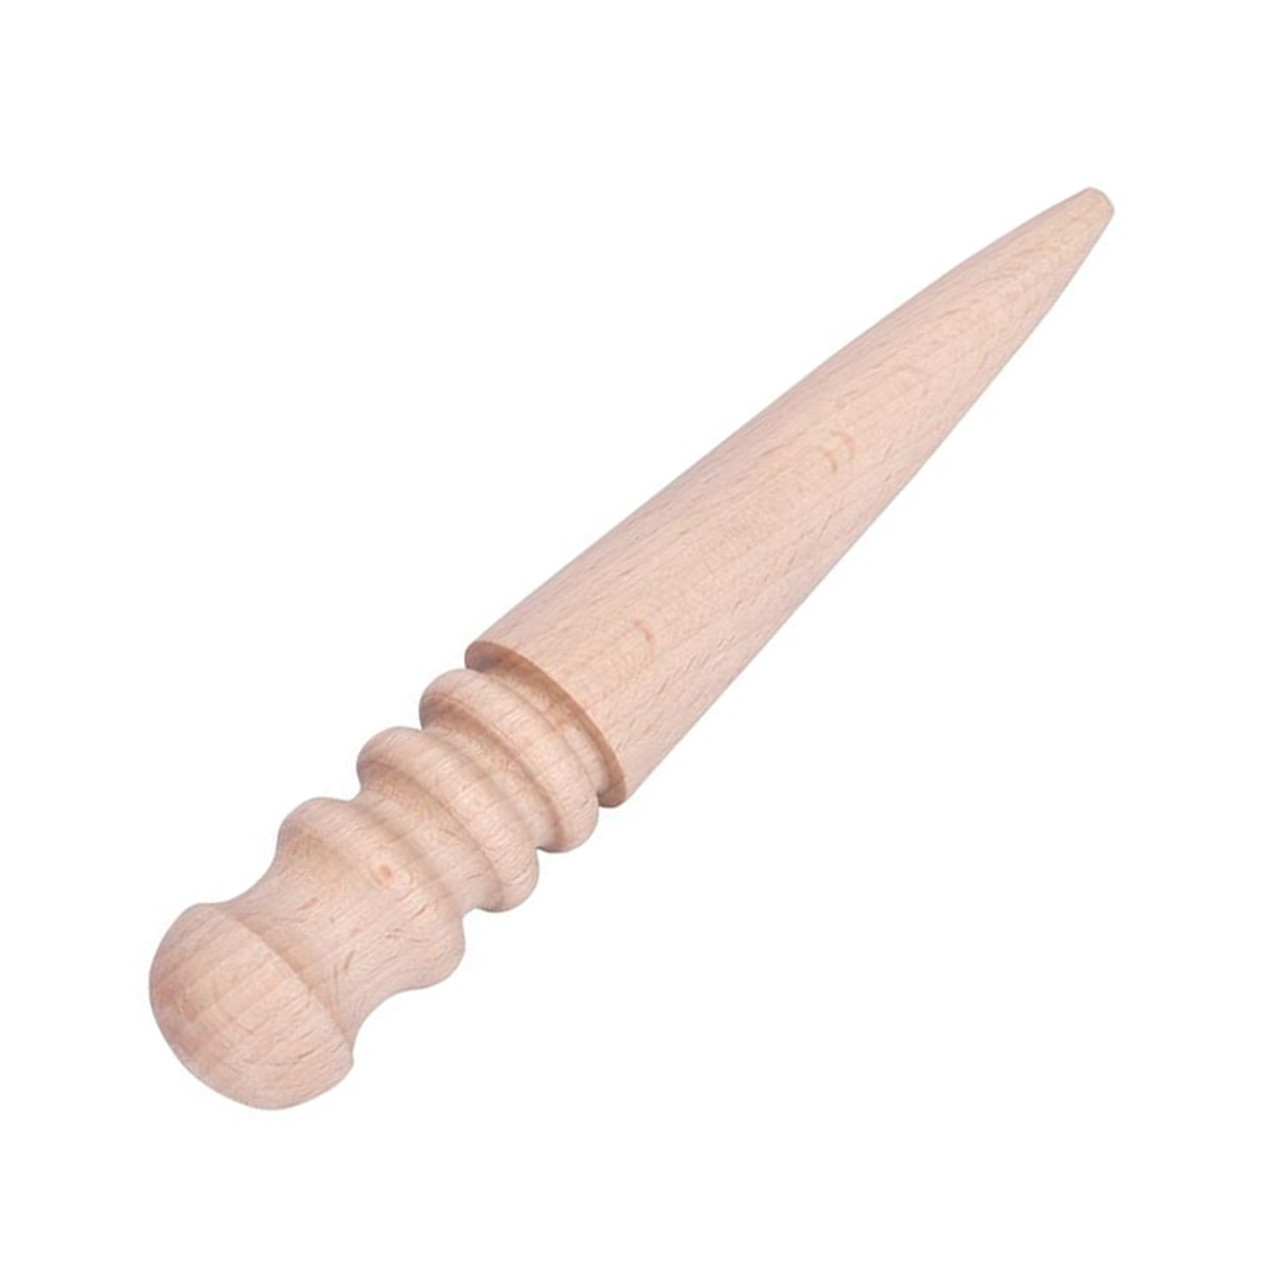 Wooden Leather Burnisher Tool - Tapered Edge Slicker Features 4 Grooves for  Burn